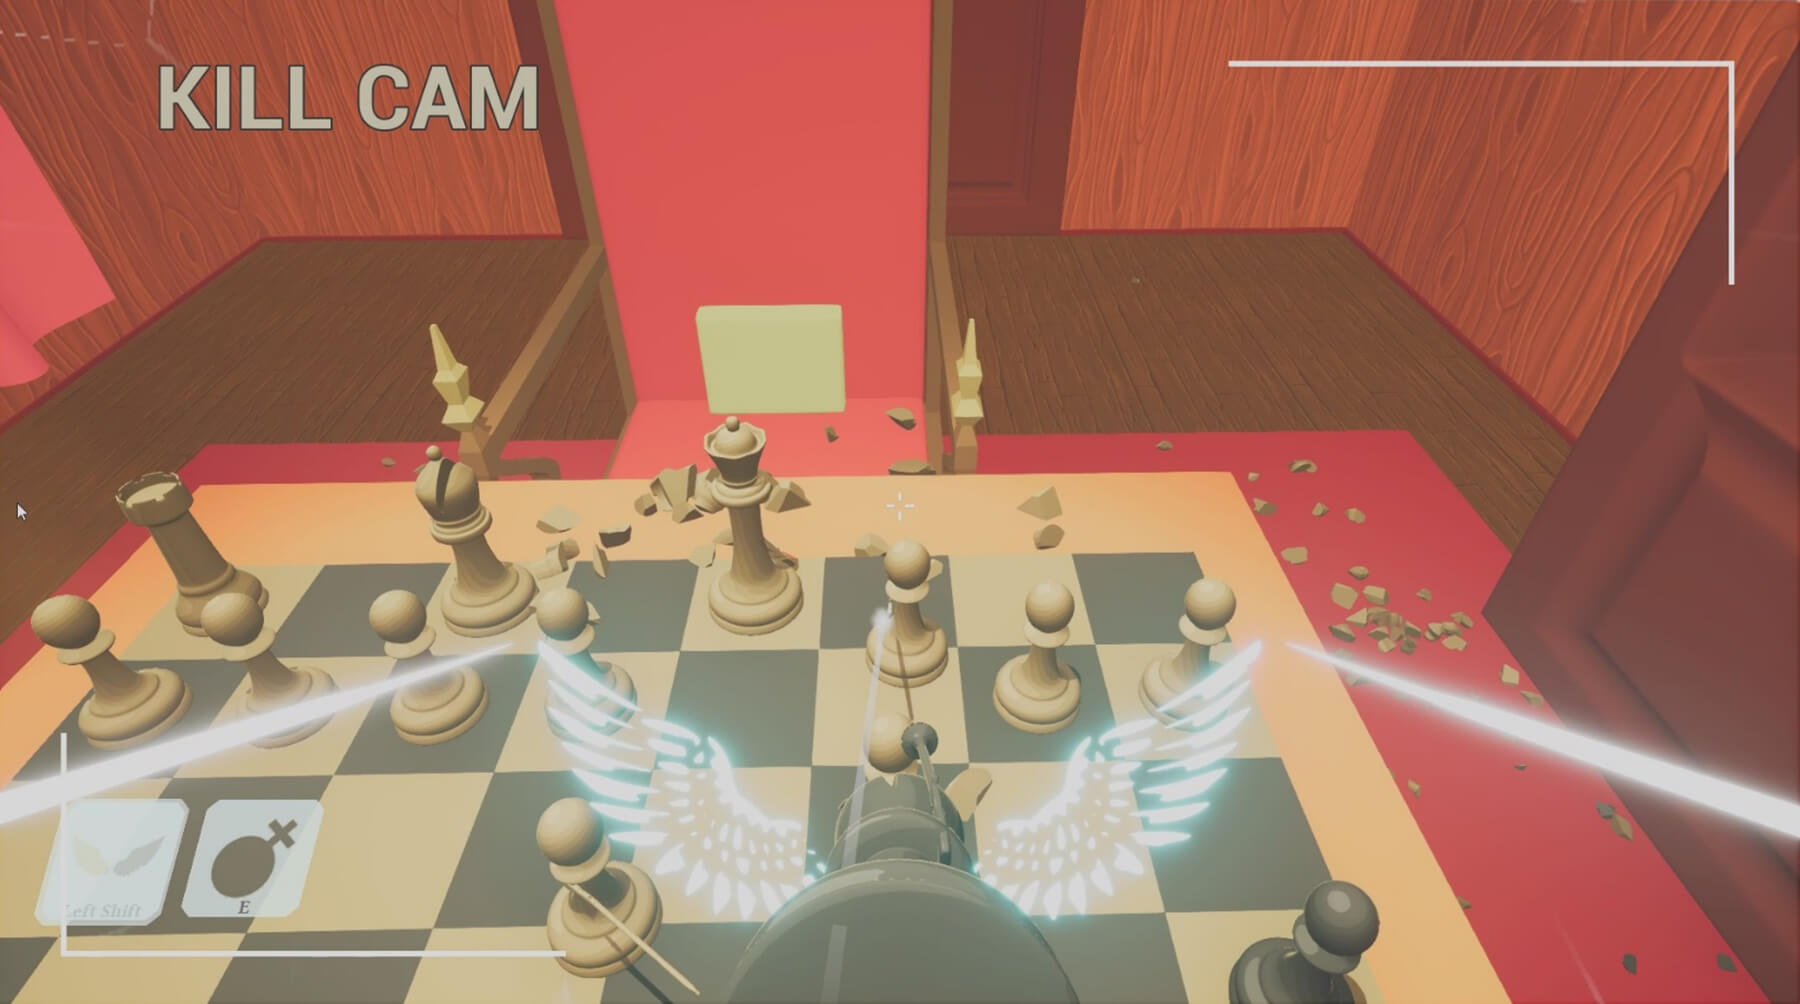 The DigiPen Show ft. Chau Nguyen and Hadi Alhussieni playing student game FPS  Chess.  In a stunning opening move, #DigiPen student game FPS Chess has  captured the #1 spot on Steam's